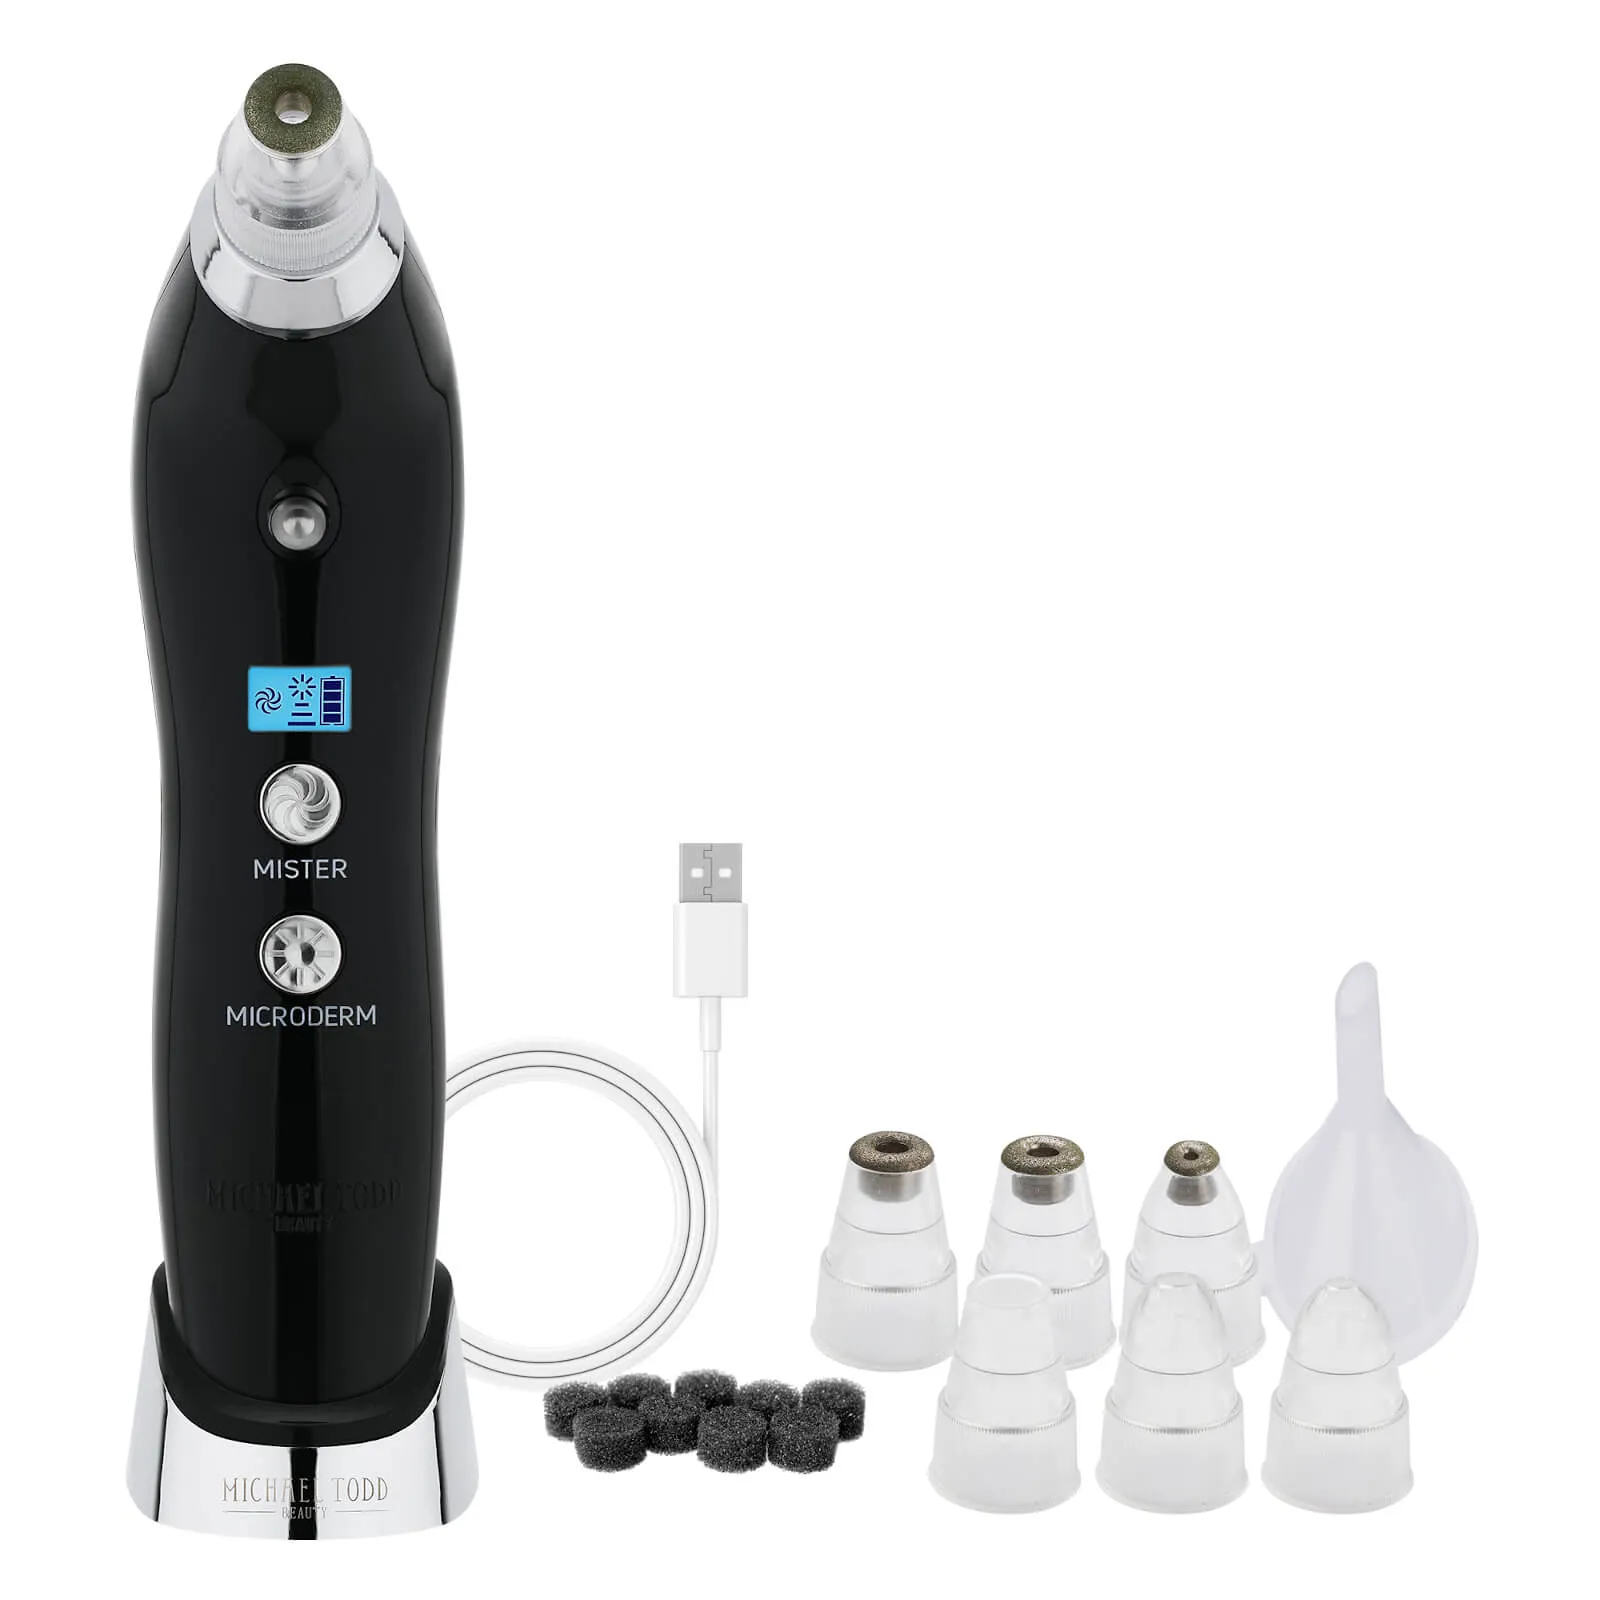  Sonic Refresher Wet/Dry Sonic Microdermabrasion and Pore Extraction System (Various Shades) - Black